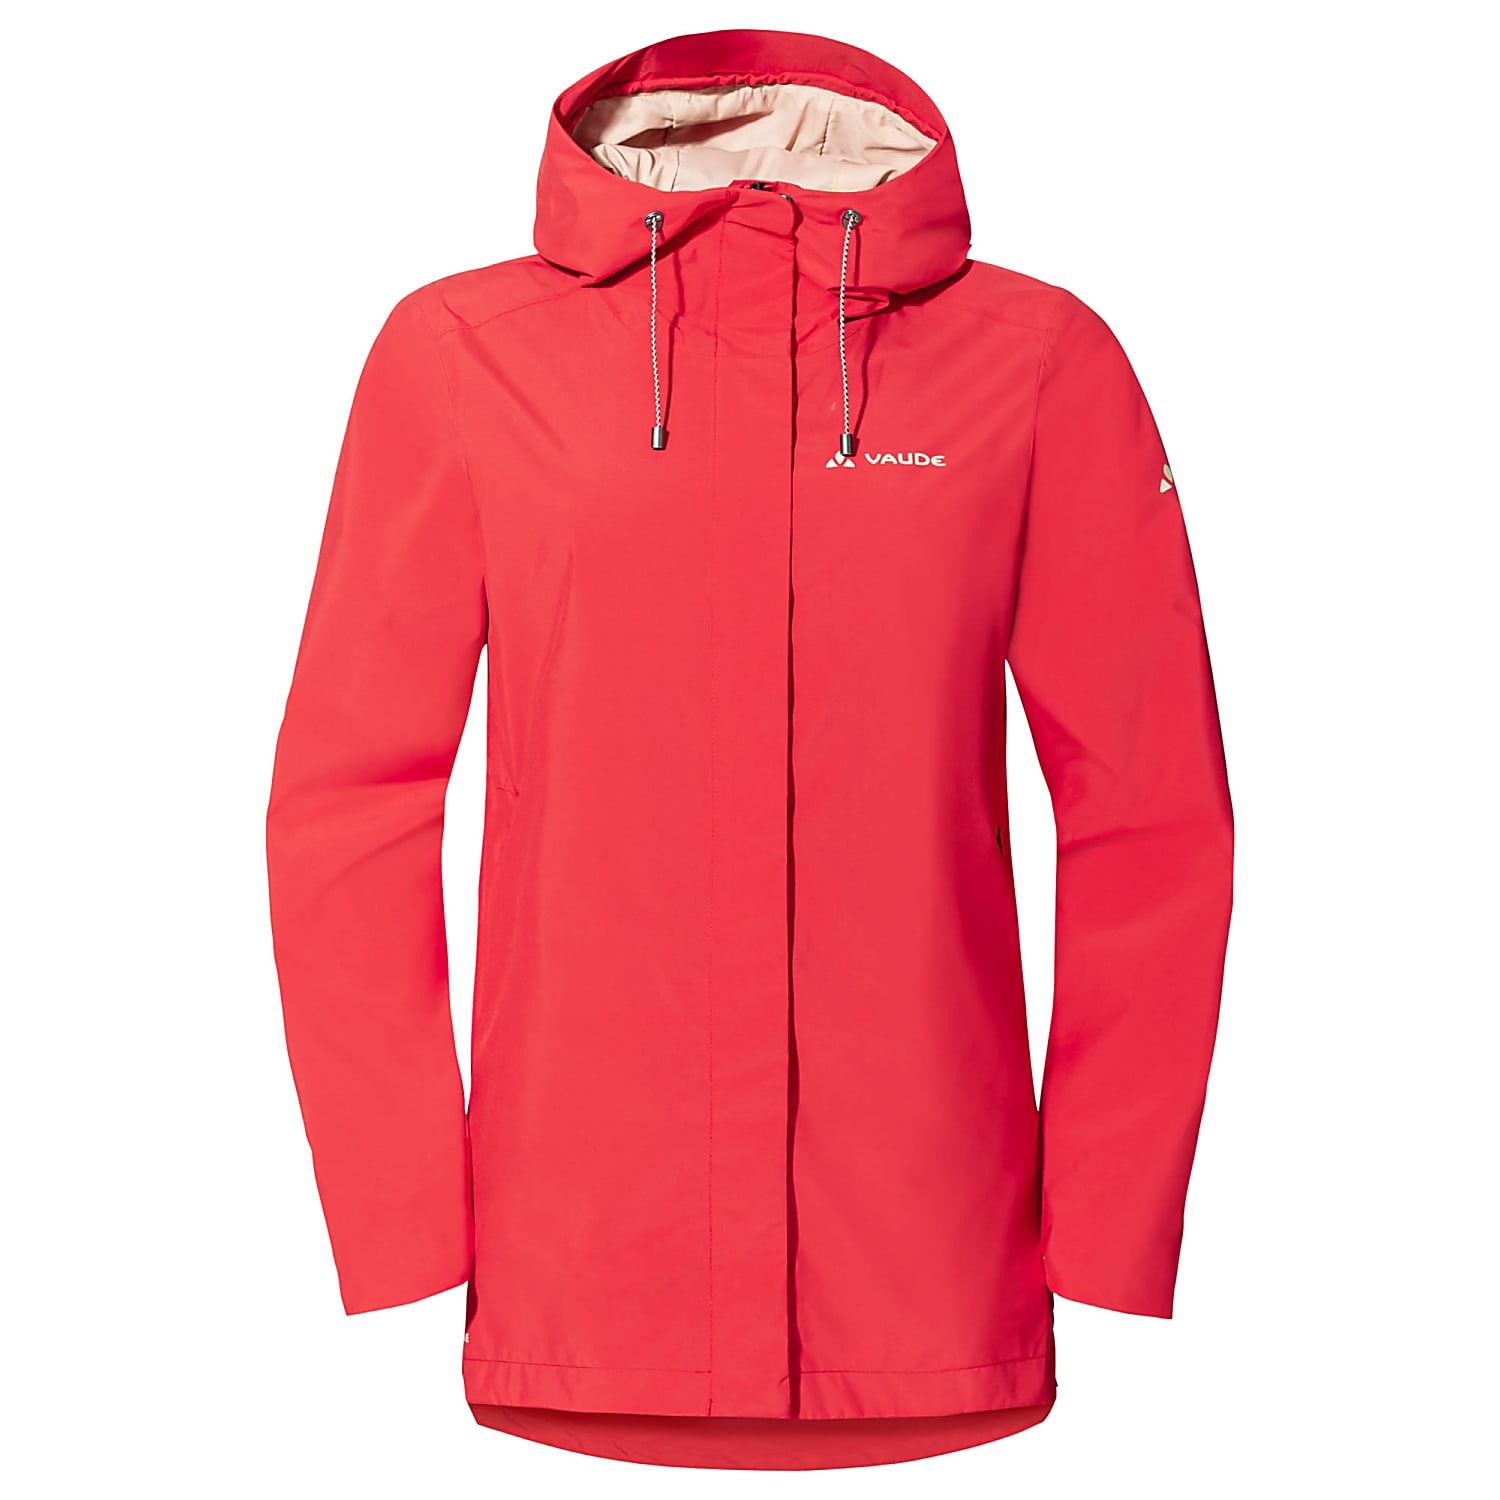 WOMENS cheap MINEO JACKET 2L shipping - Flame II, Fast and Vaude